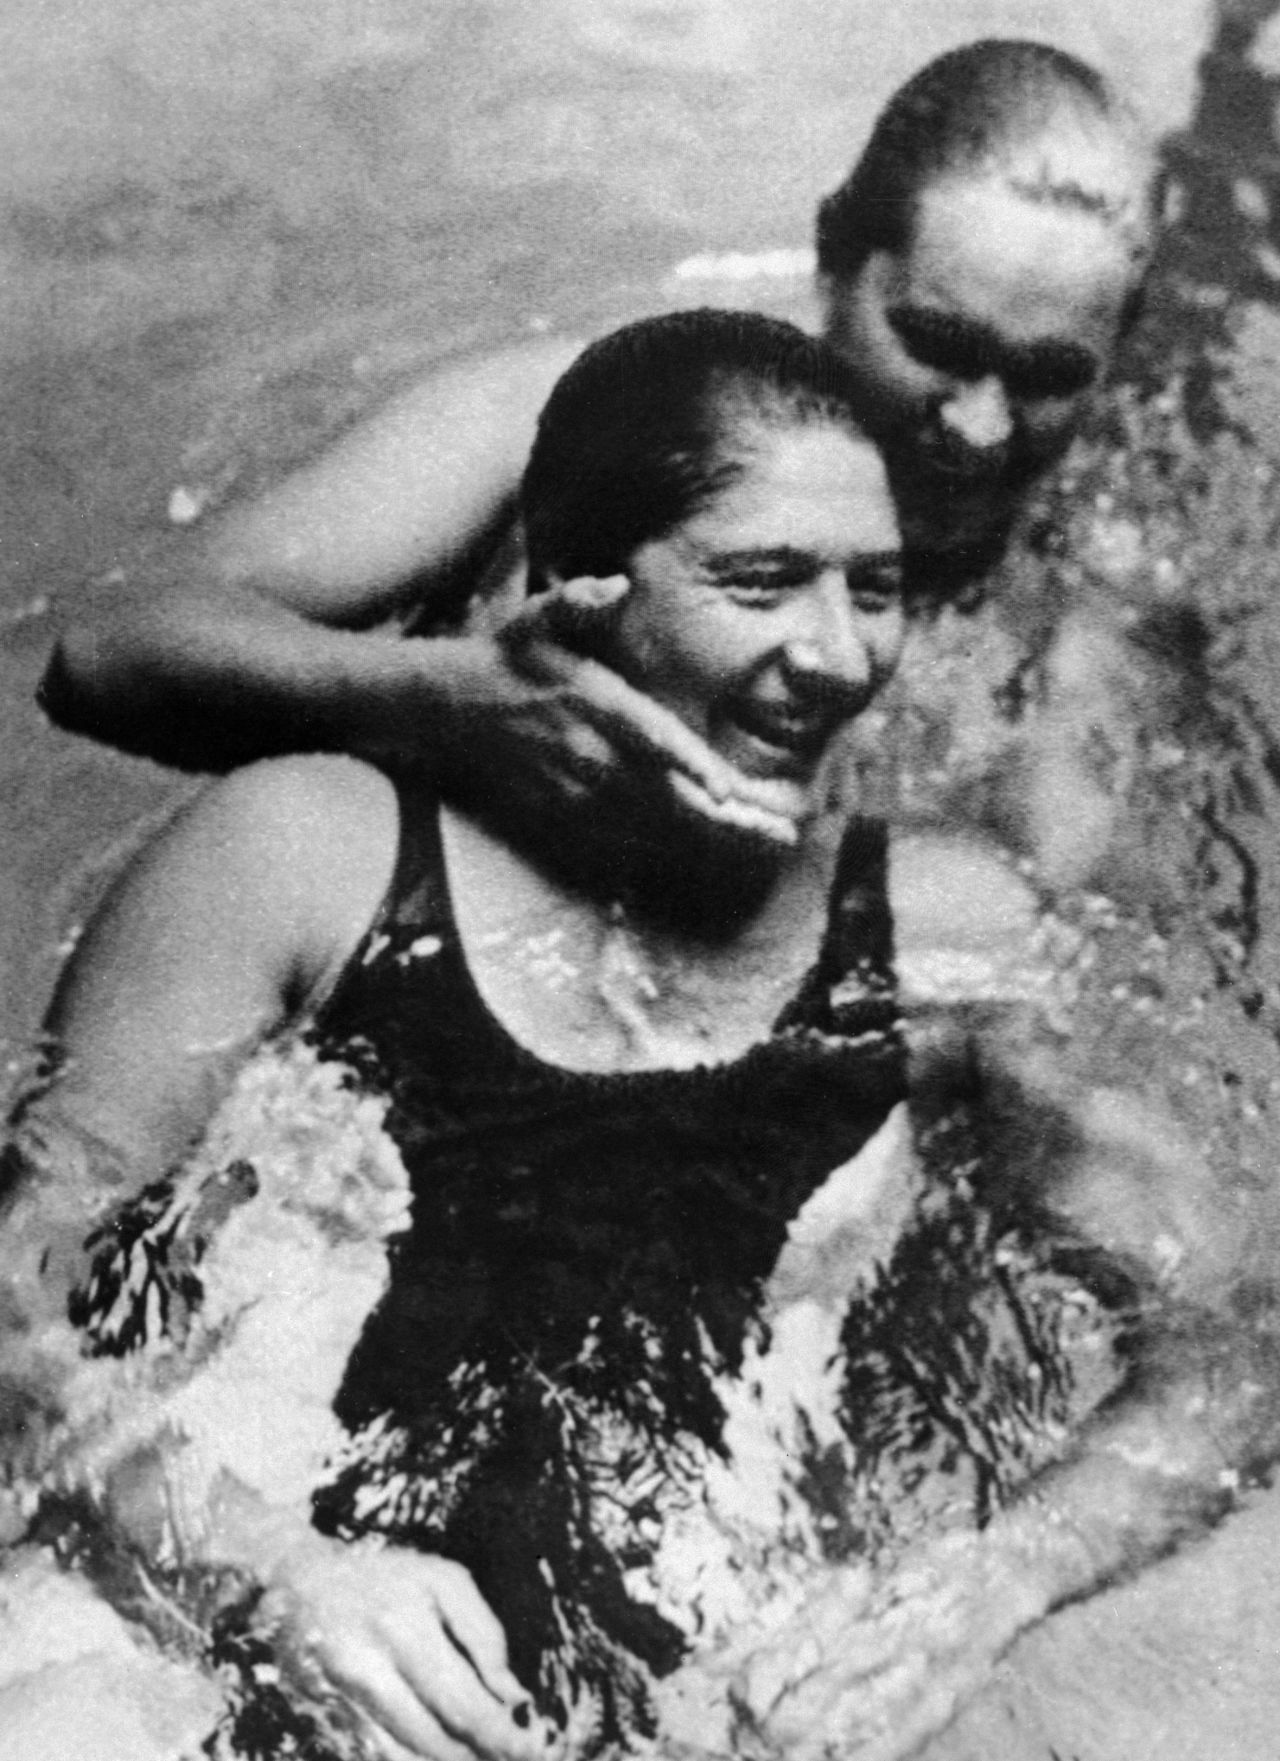  Australian swimming champion Dawn Fraser (in front) with her country fellow Linda McGill before the race where she set a new 100 meter record and became the first ever woman to finish in under a minute. During her career, she won eight Olympic freestyle medals, including four golds, and beat 27 world records.